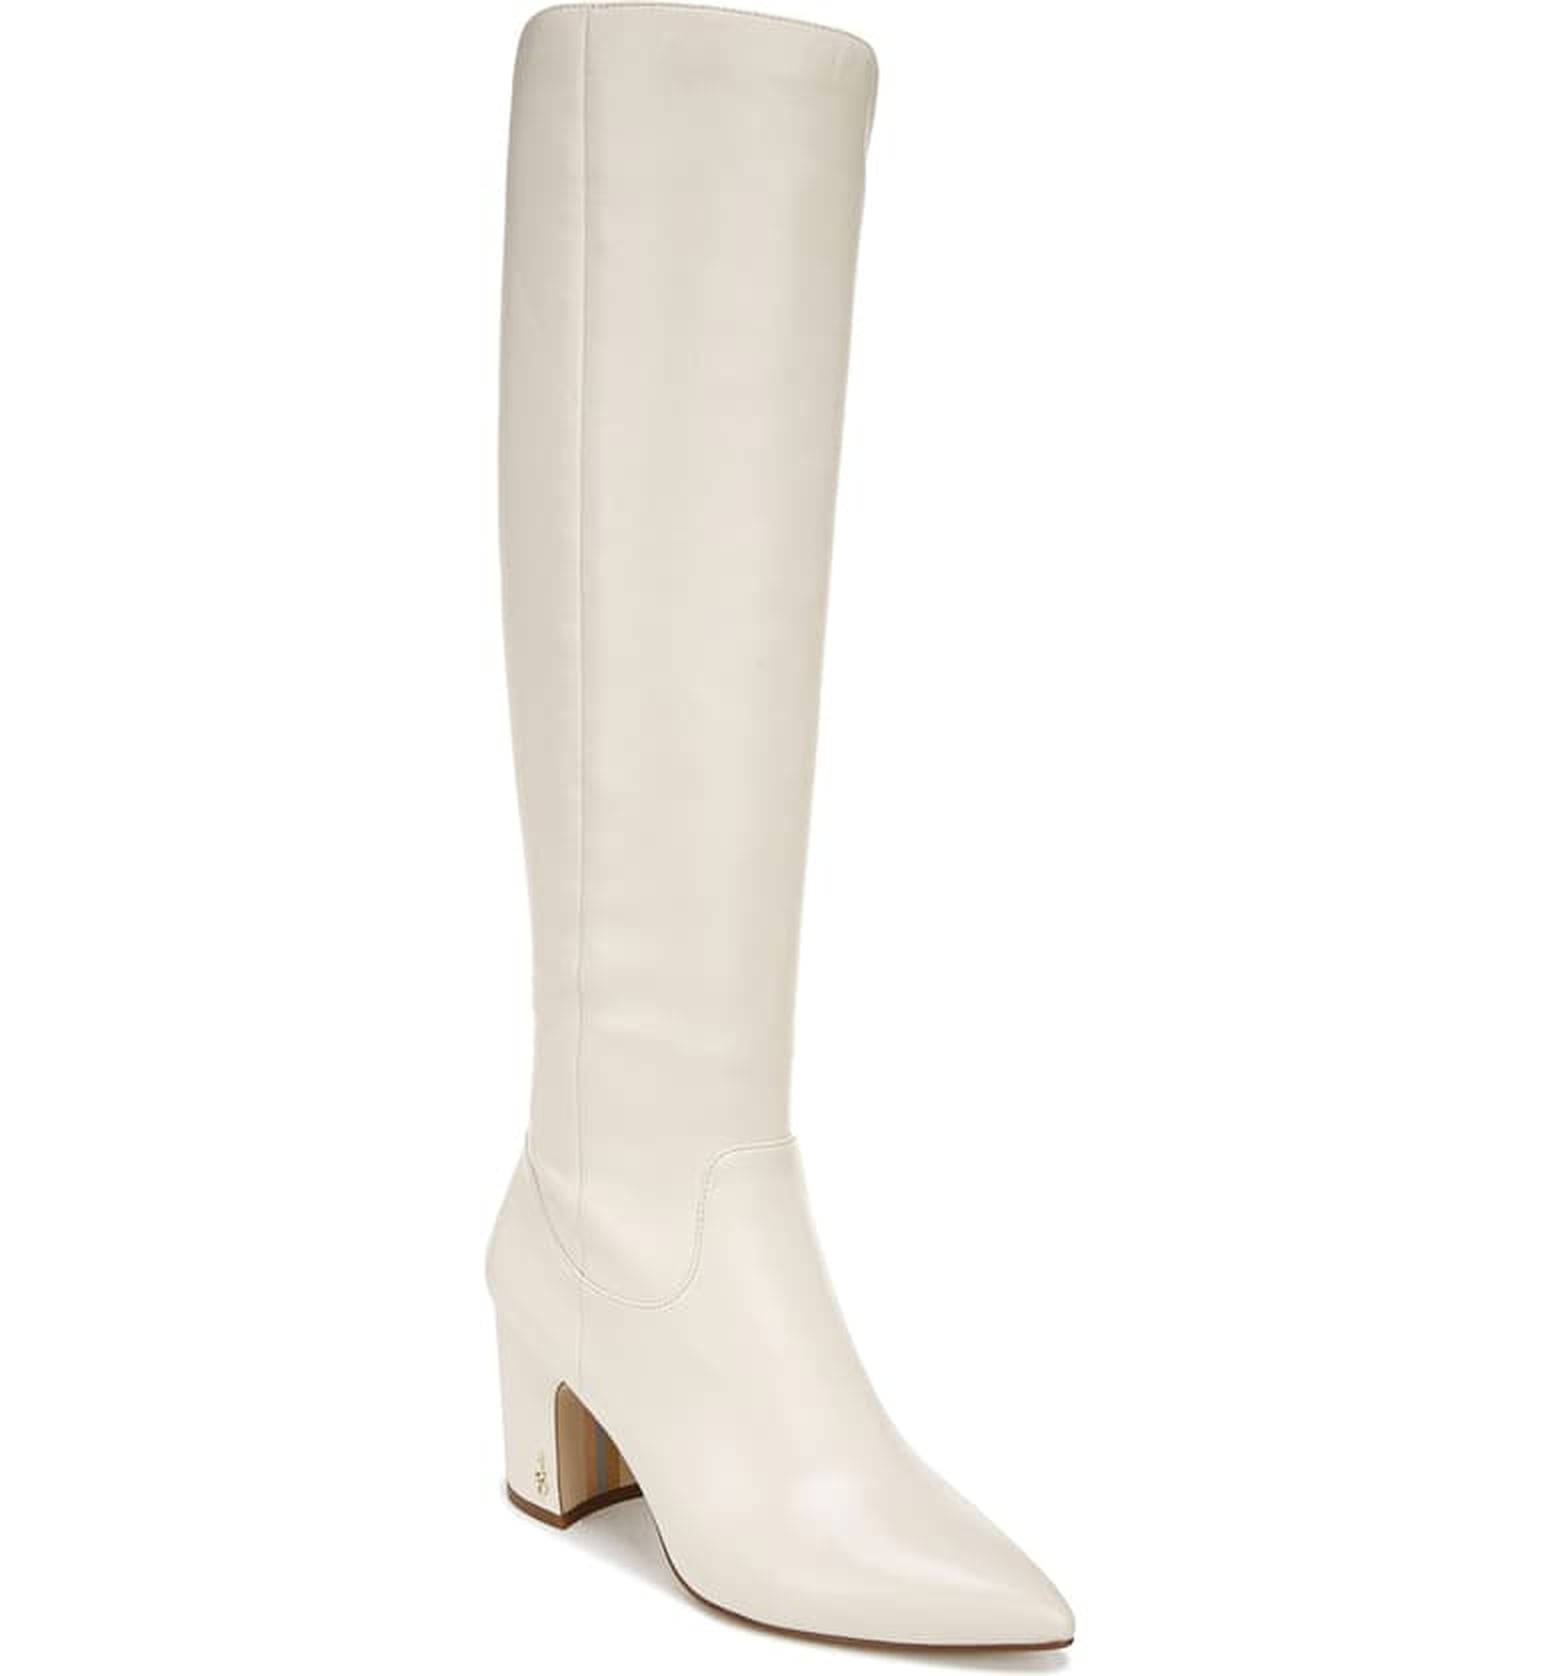 The Most Stylish and Popular Knee-High Boots to Shop | POPSUGAR Fashion